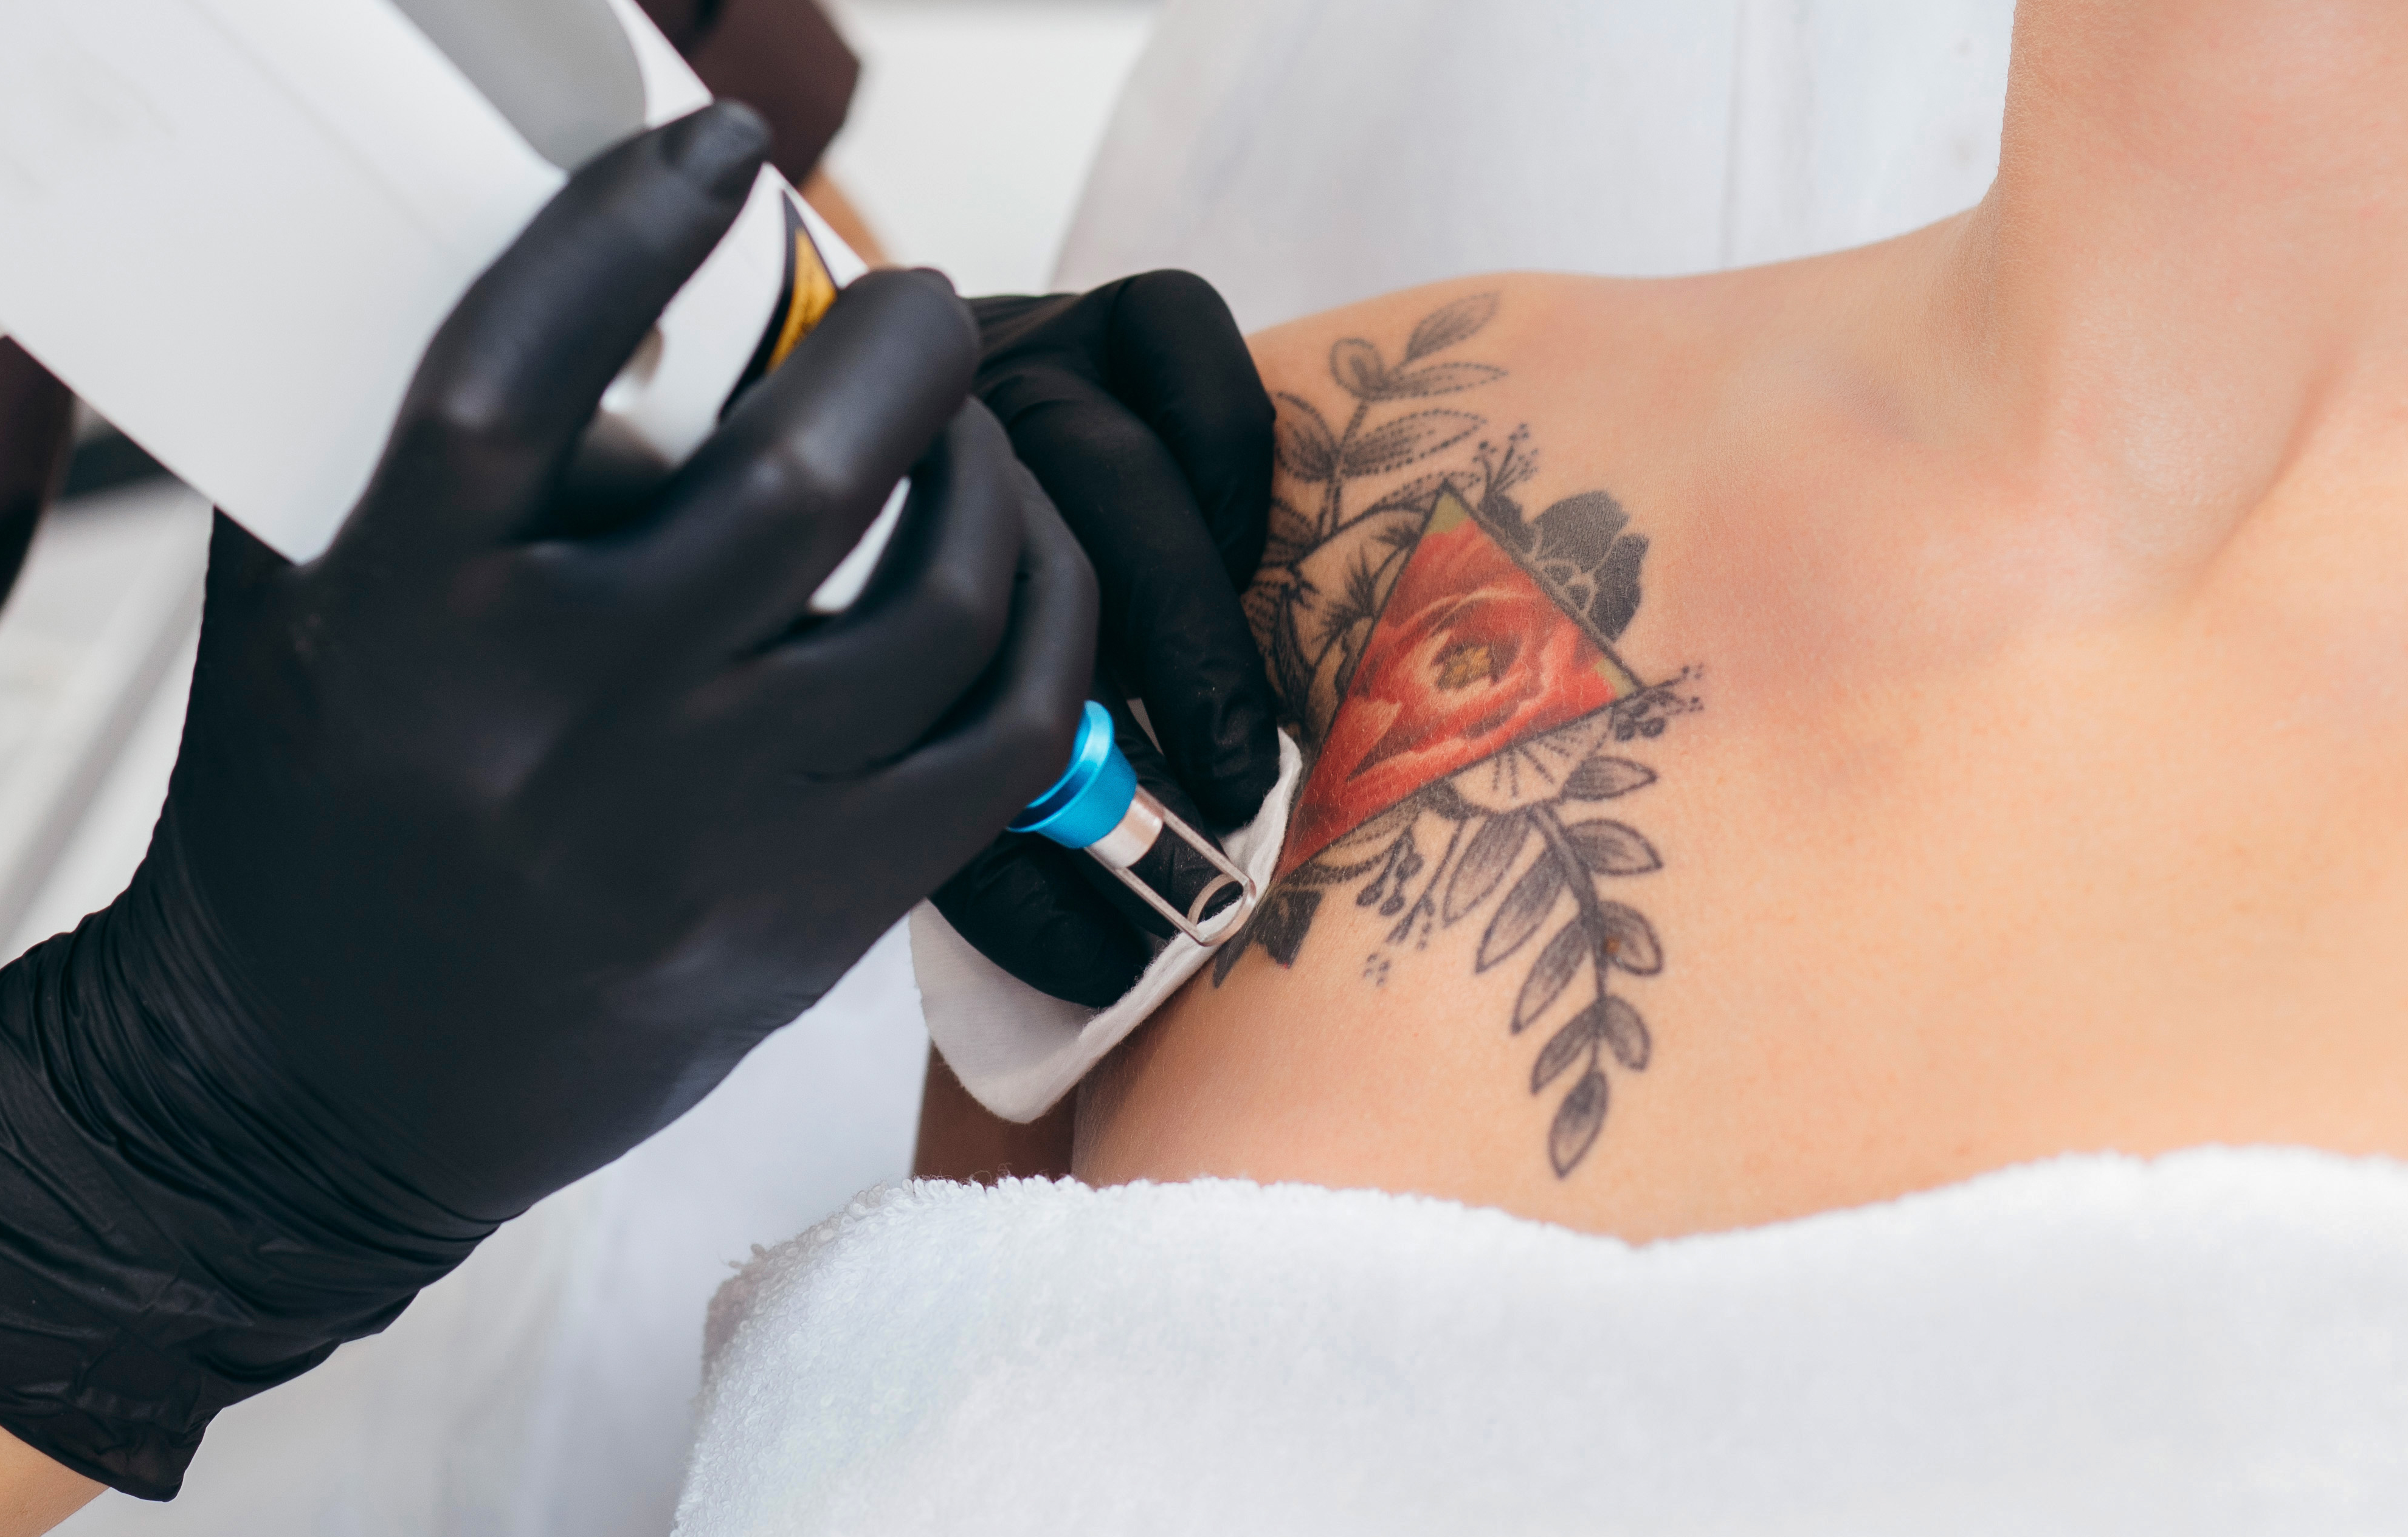 Tattoo removal: a colorful challenge requiring multiple laser wavelengths